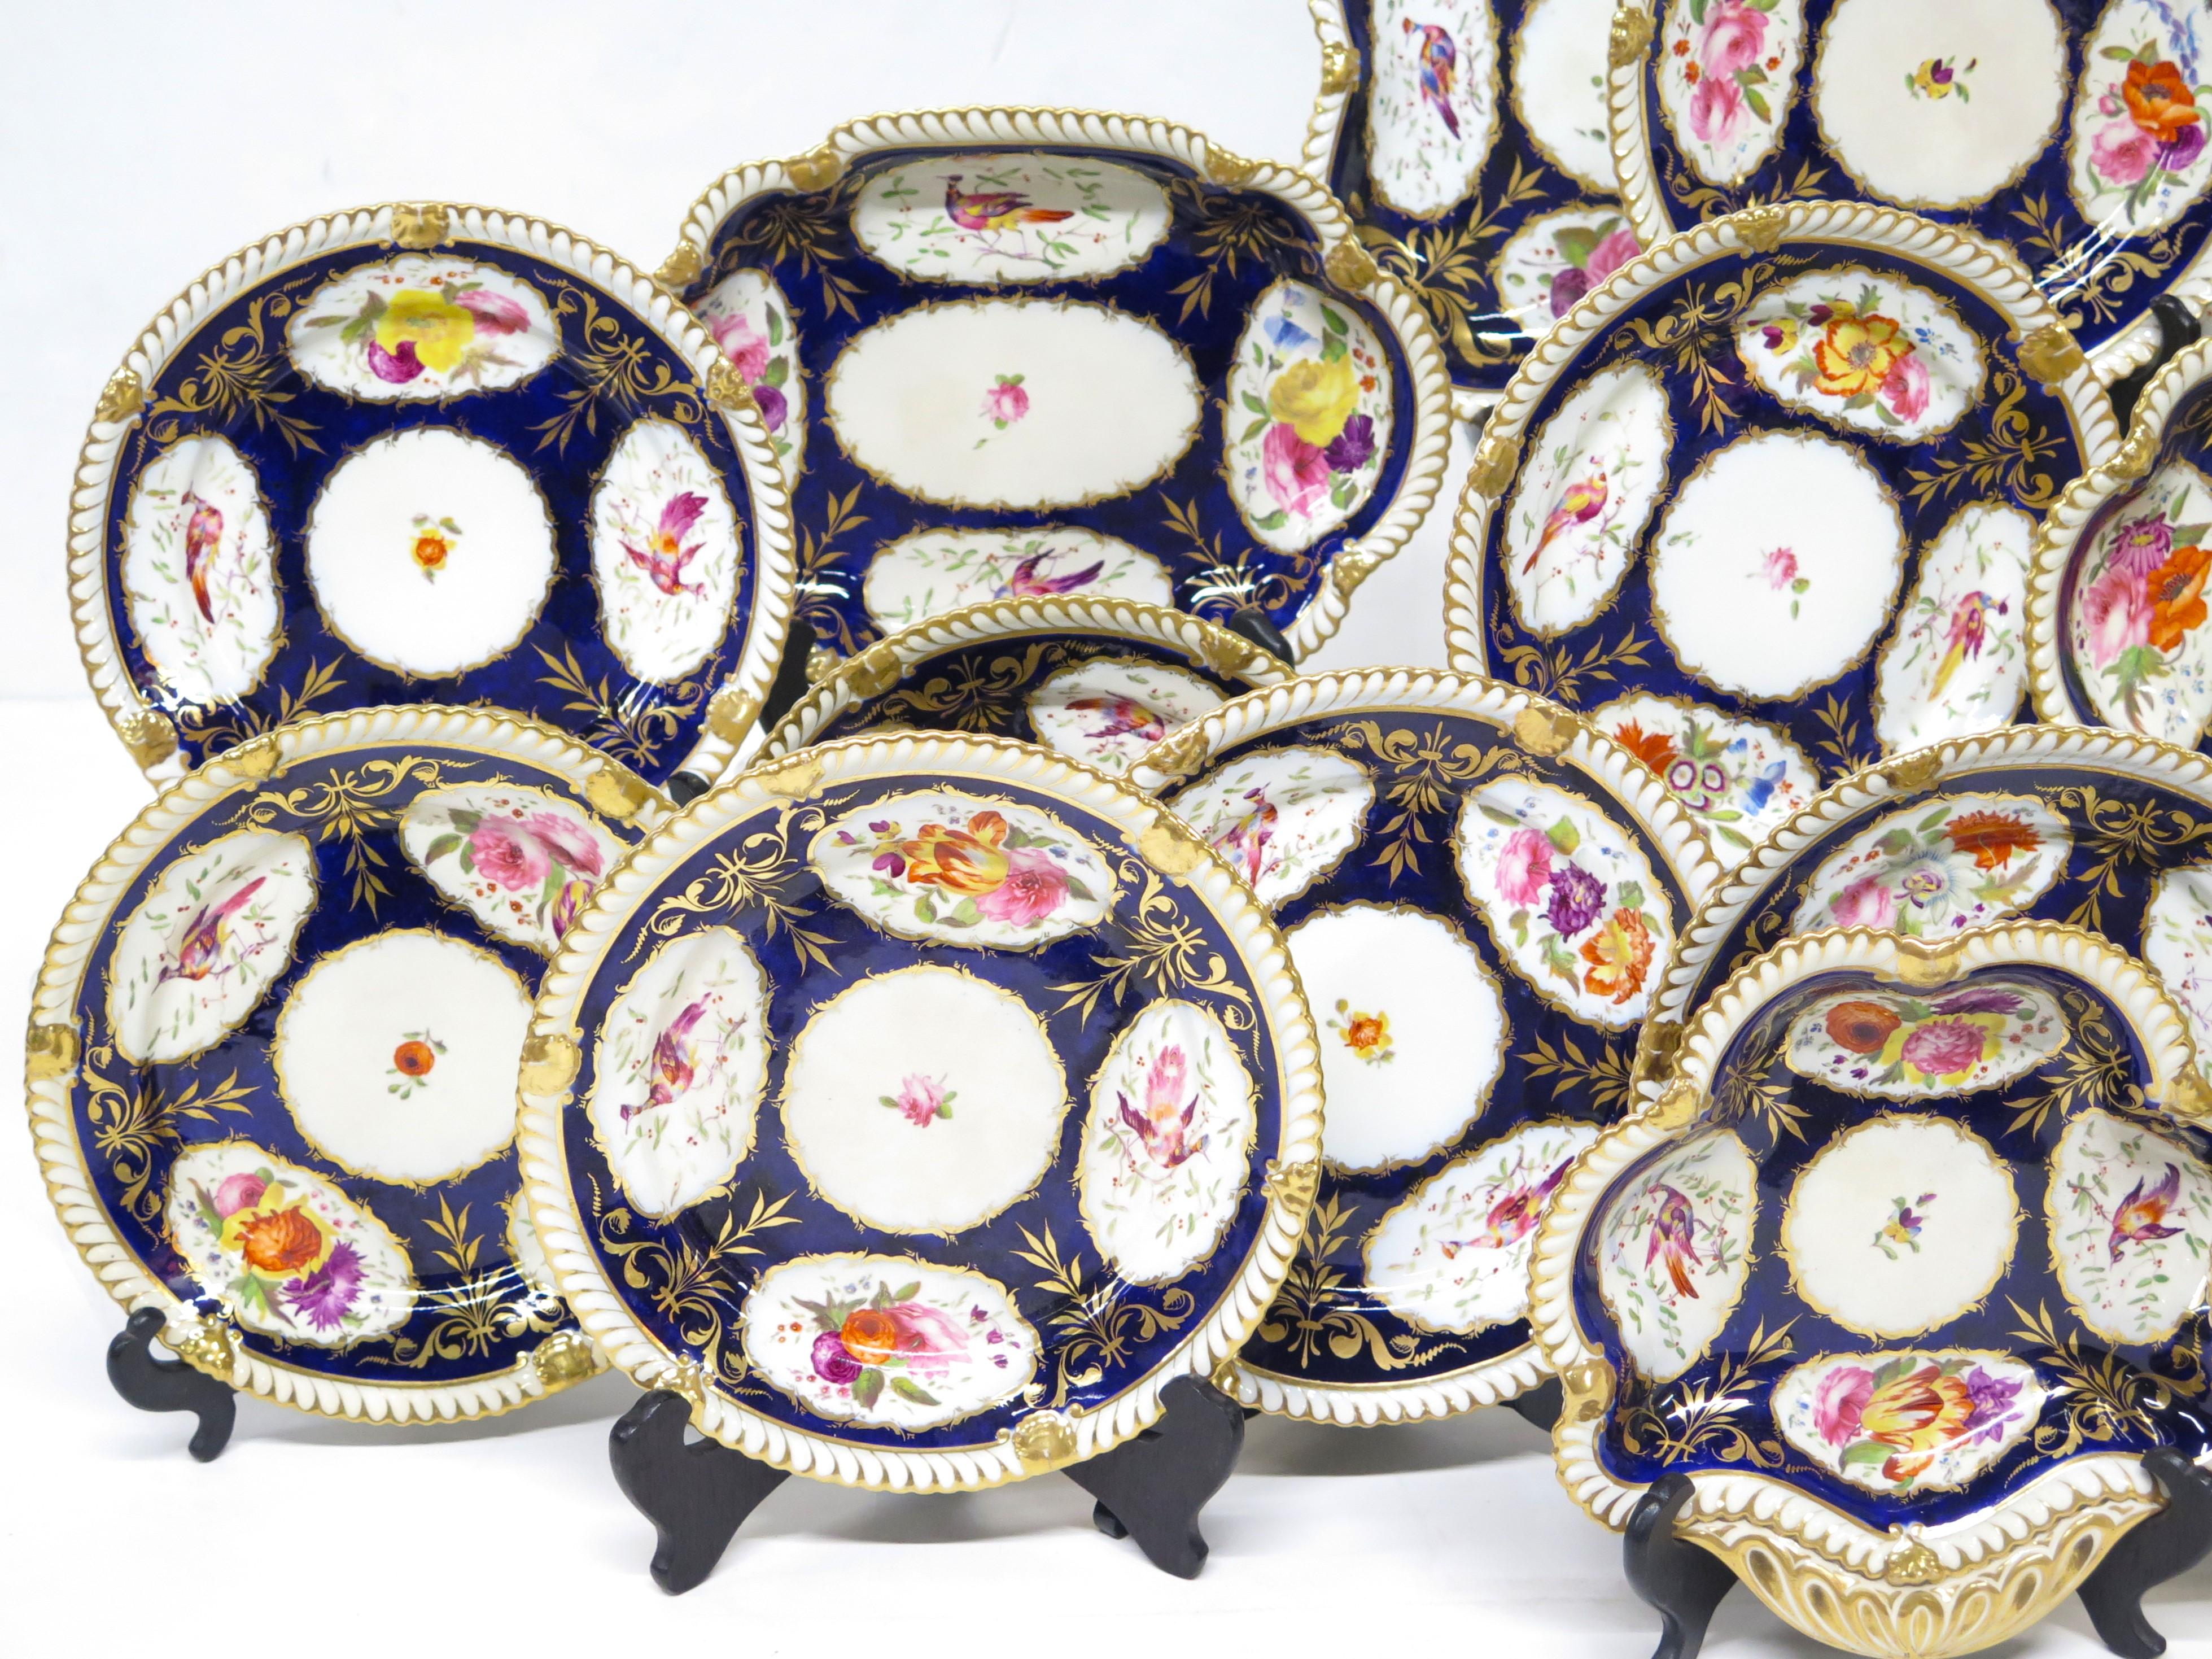 Cast A Group of Royal Crown Derby-Style Cobalt & Floral Hand-Painted China For Sale